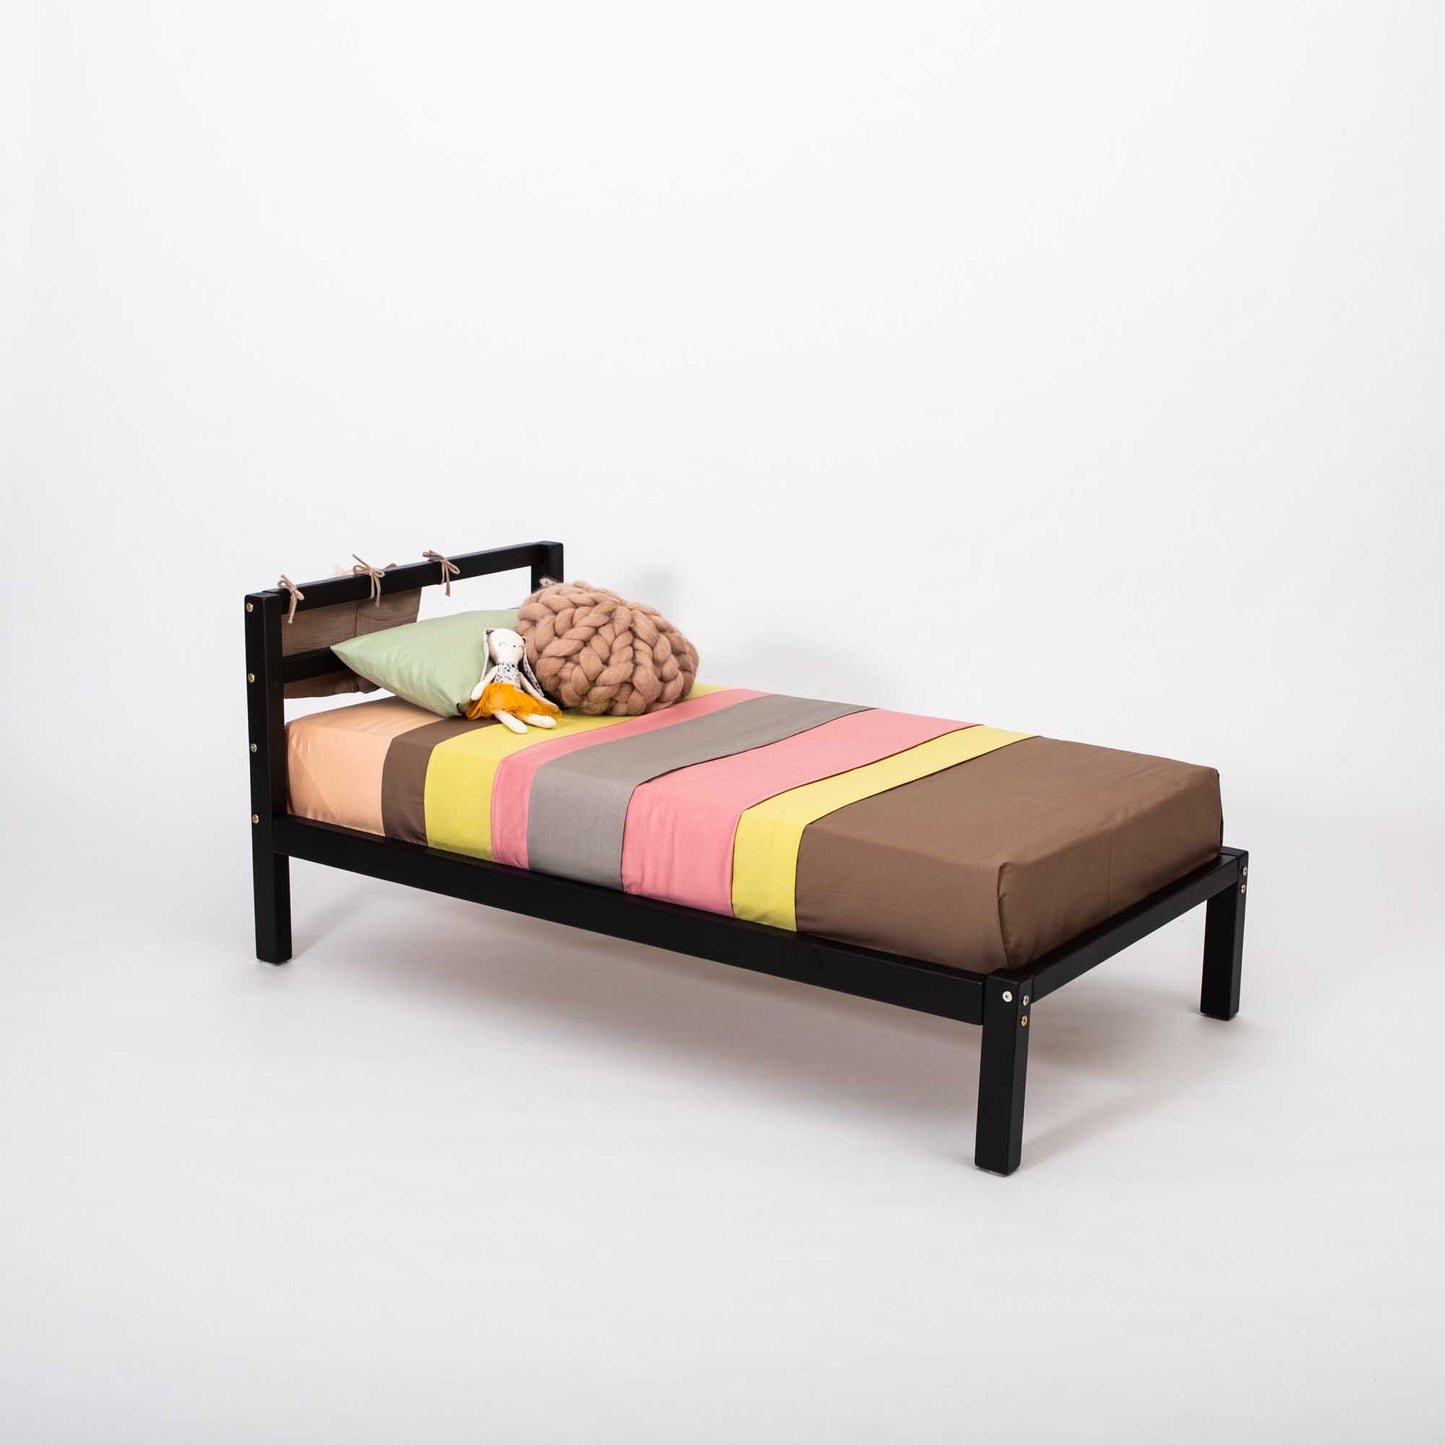 A Sweet Home From Wood Kids' bed on legs with a horizontal rail headboard and a colorful striped blanket, inspired by Montessori.